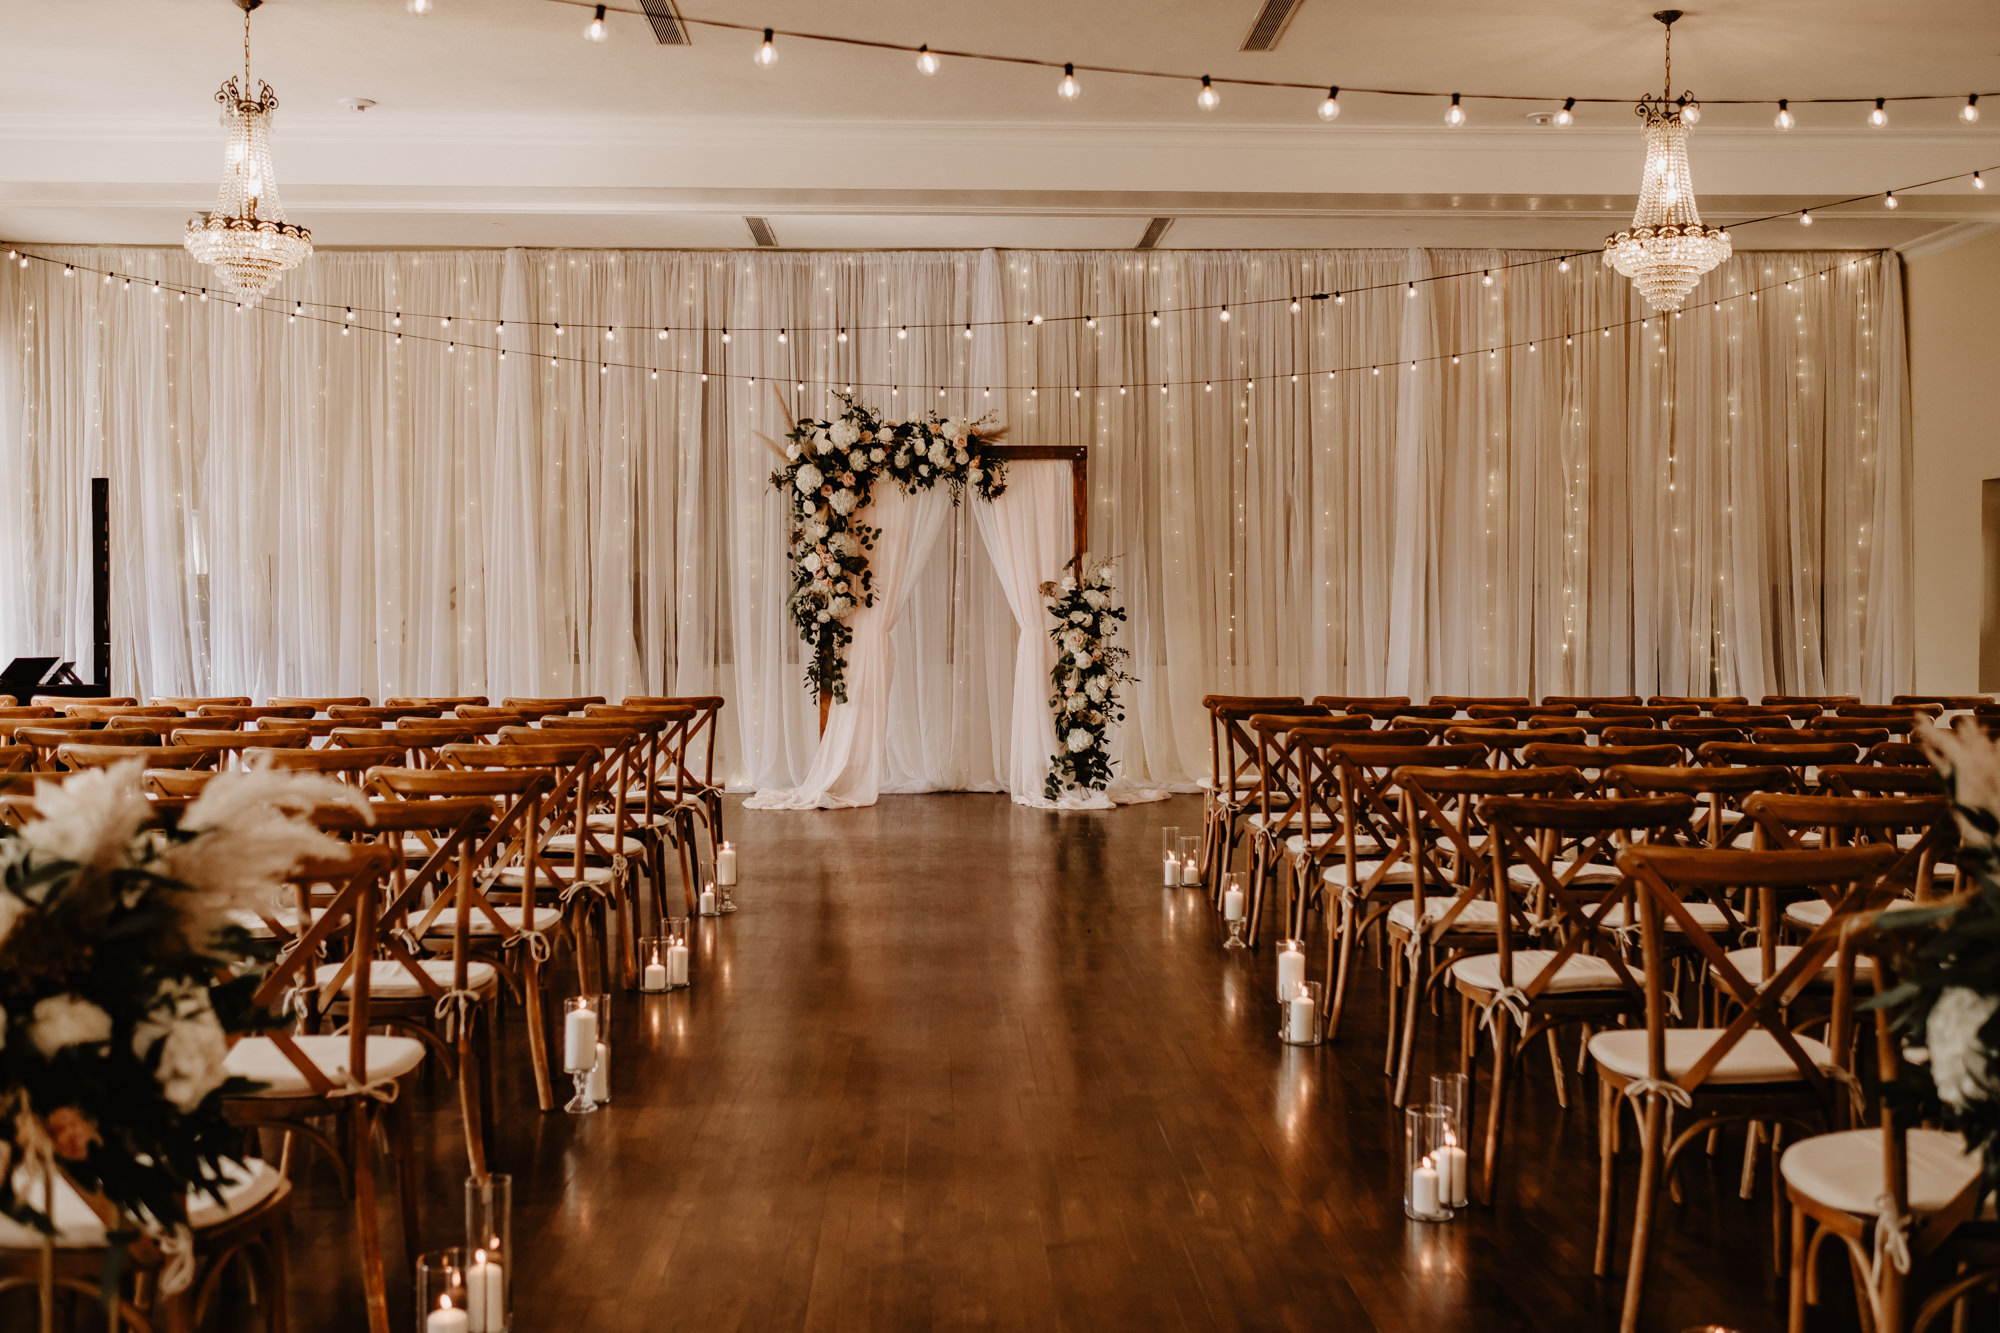 Neutral Boho Modern Wedding Ceremony Decor, Wooden Cross Back Chairs, Hanging String Lights, Wooden Arch with White Linens, Lush Greenery, White Flowers and Pampas Grass Floral Arrangements | Tampa Bay Wedding Planner Taylored Affairs | Wedding Rentals Gabro Event Services